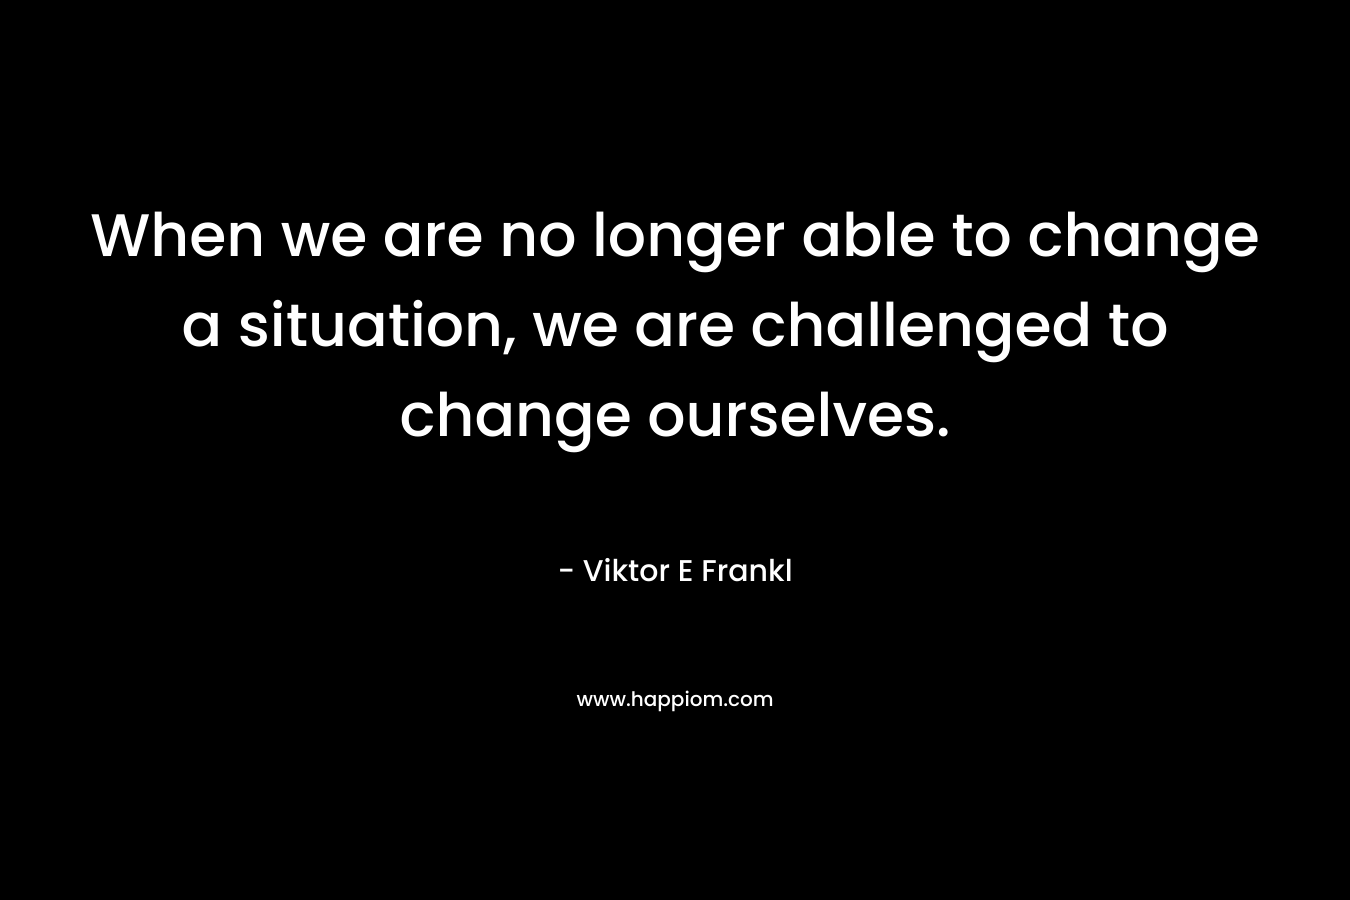 When we are no longer able to change a situation, we are challenged to change ourselves. – Viktor E Frankl